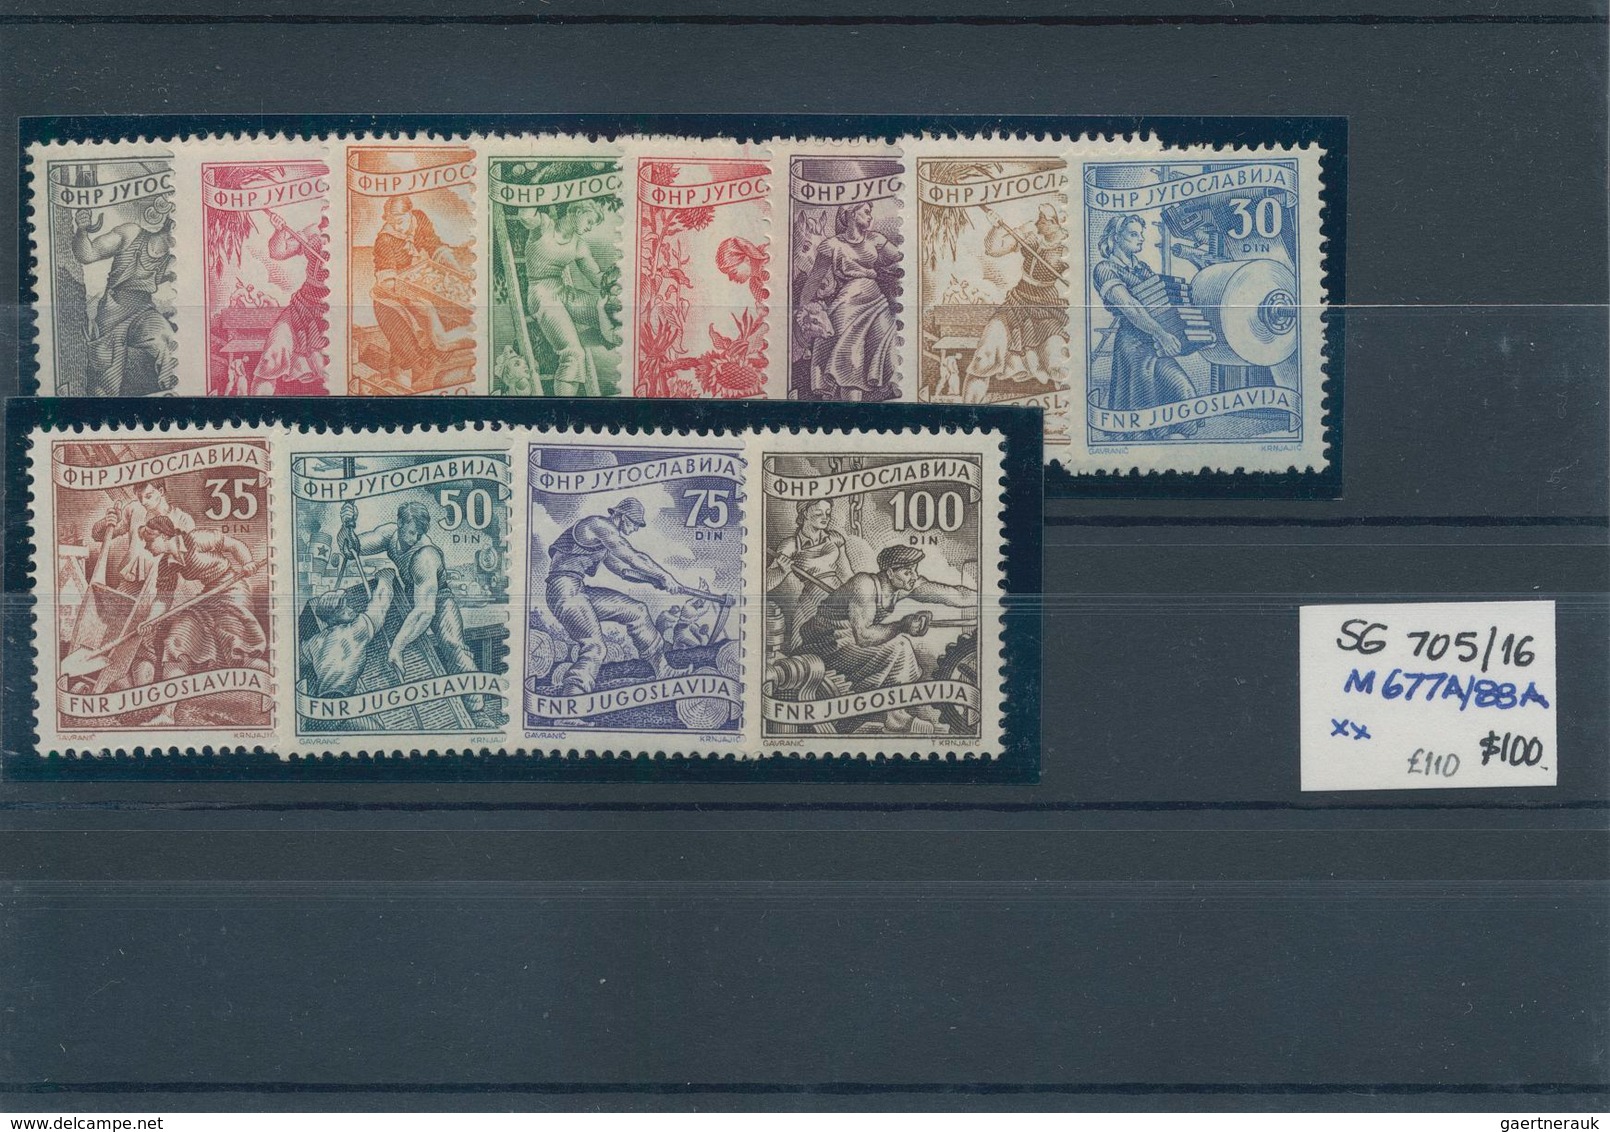 Jugoslawien: 1937/1970 (ca.), mainly u/m holding on stockcards in a small binder, almost exclusively